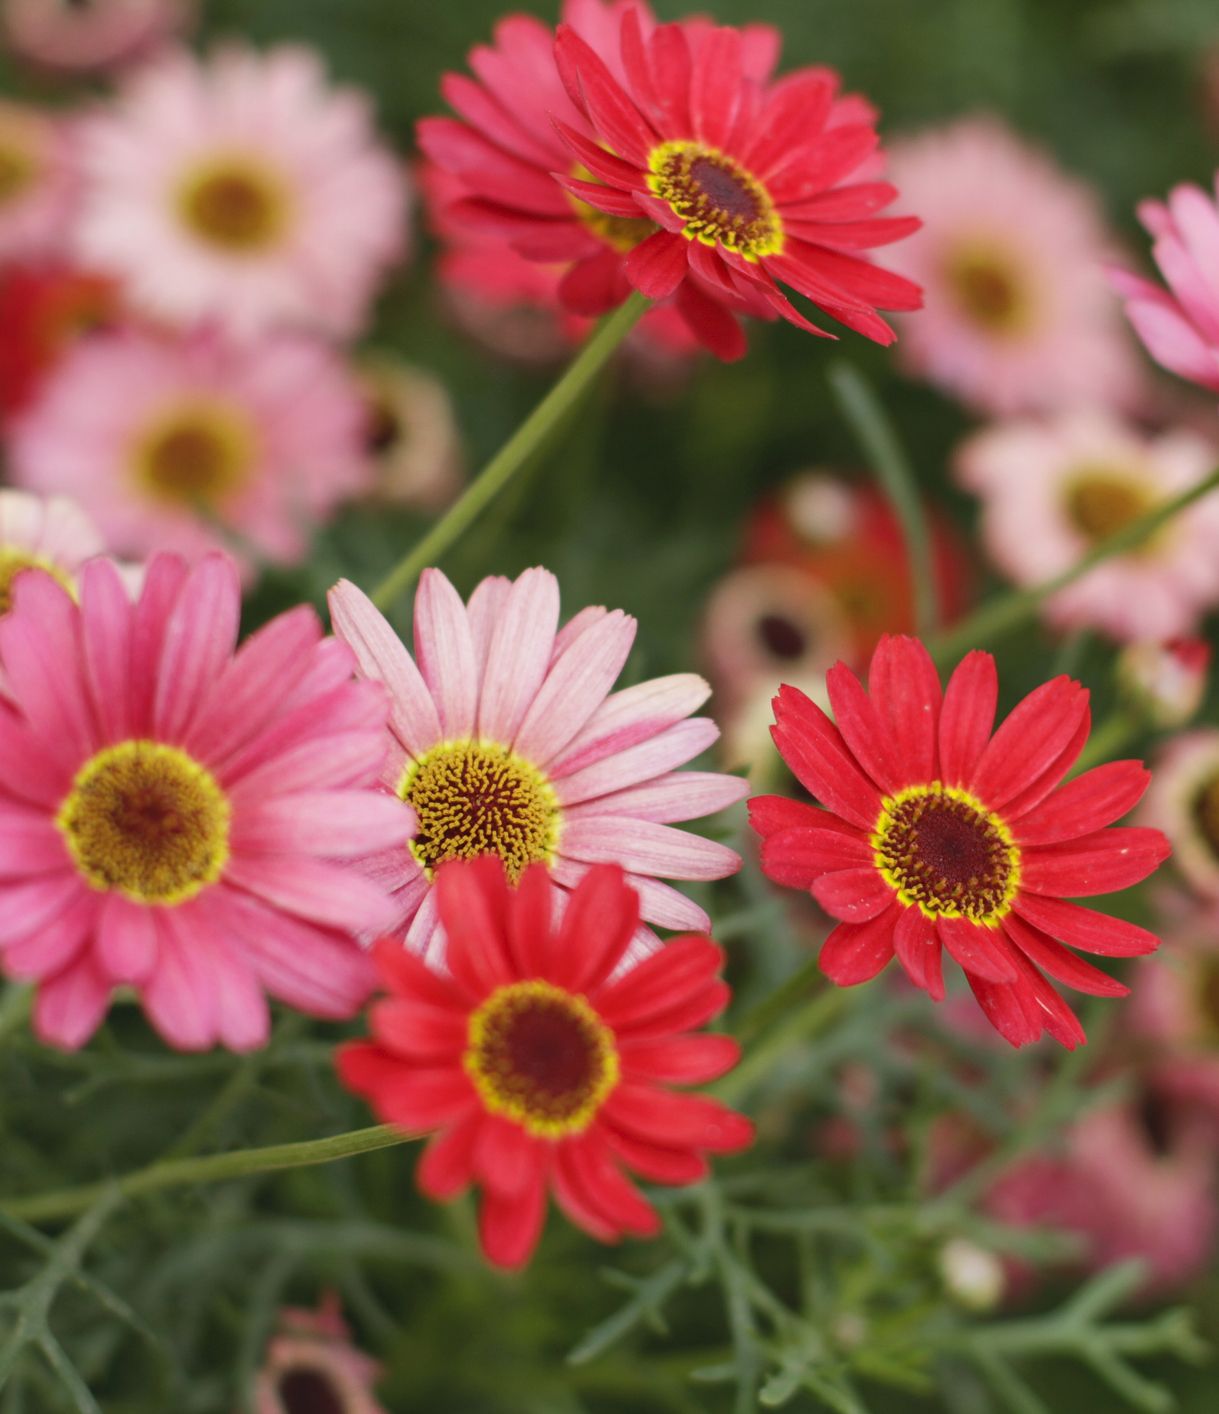 Crazy for Daisies: Types of Colorful Daisies